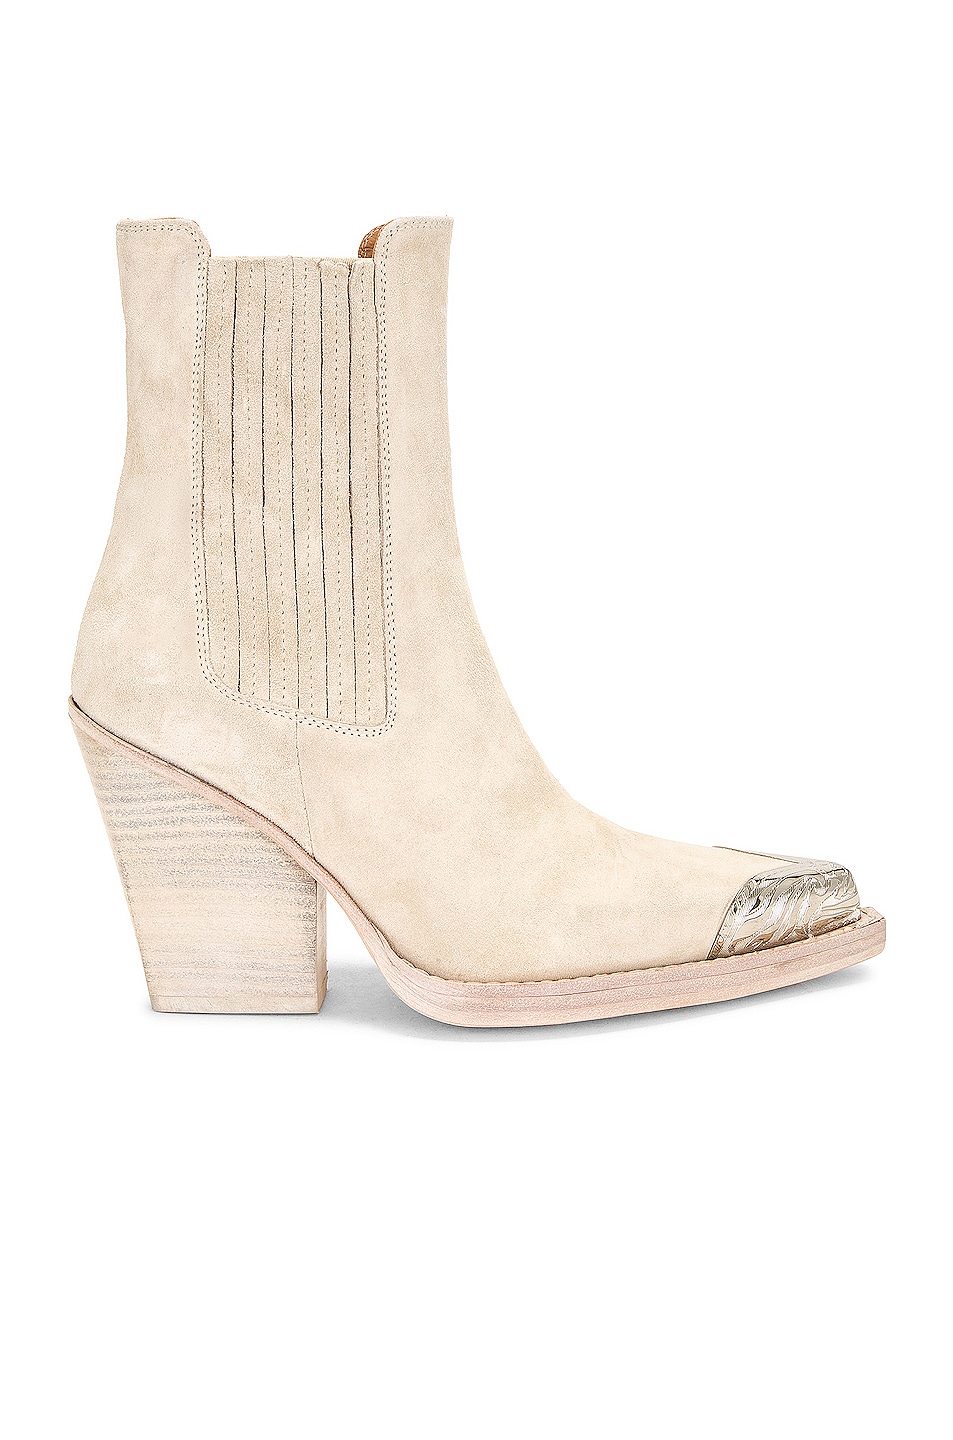 Image 1 of Paris Texas Dallas Embellished Toe Ankle Boot in Off White